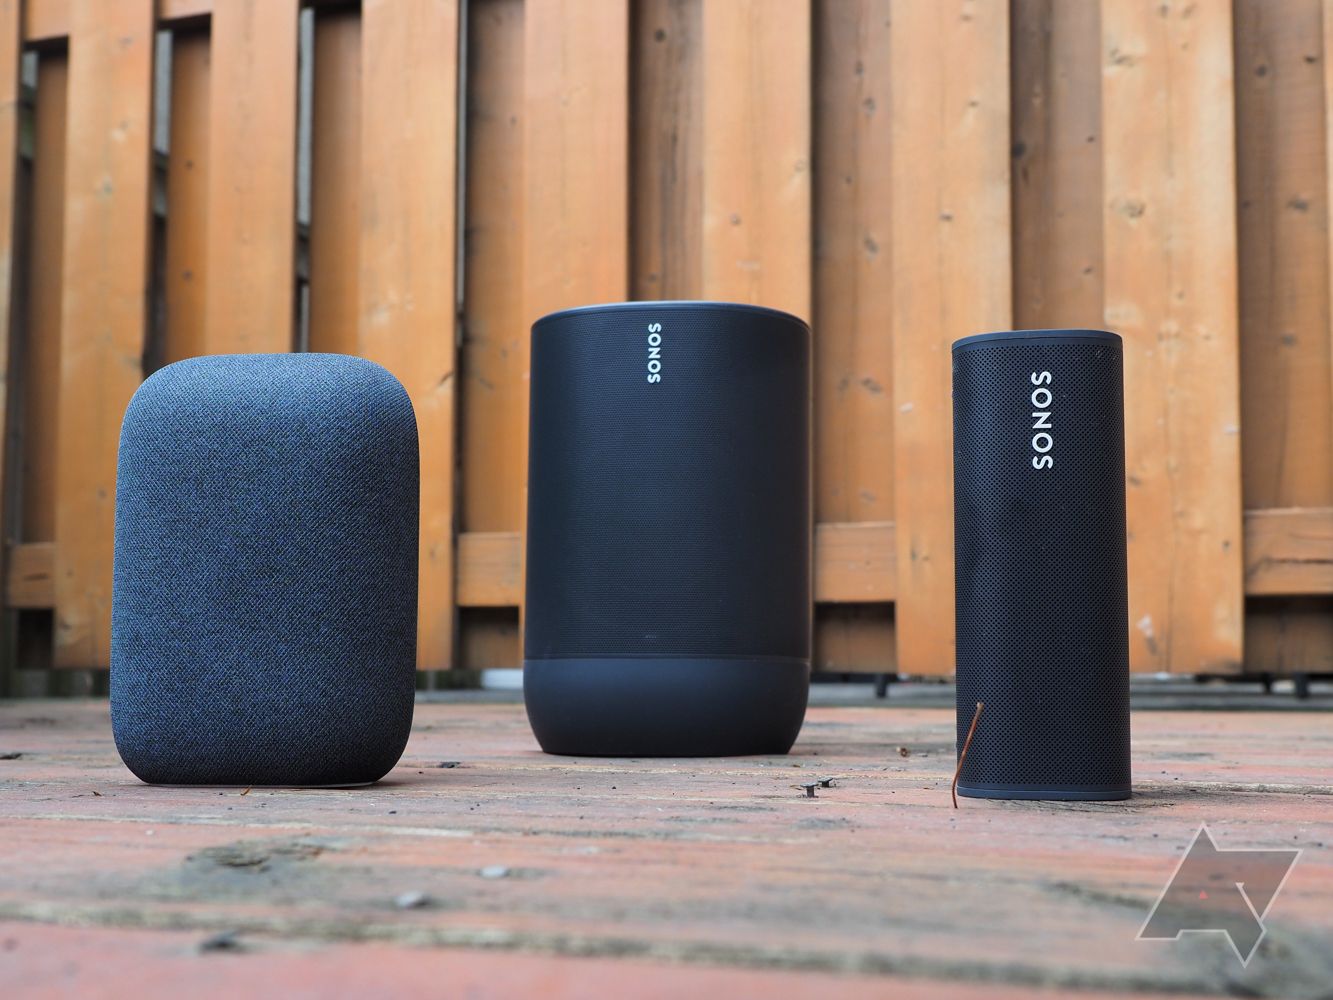 Best Smart Speakers from Google, Sonos, and more